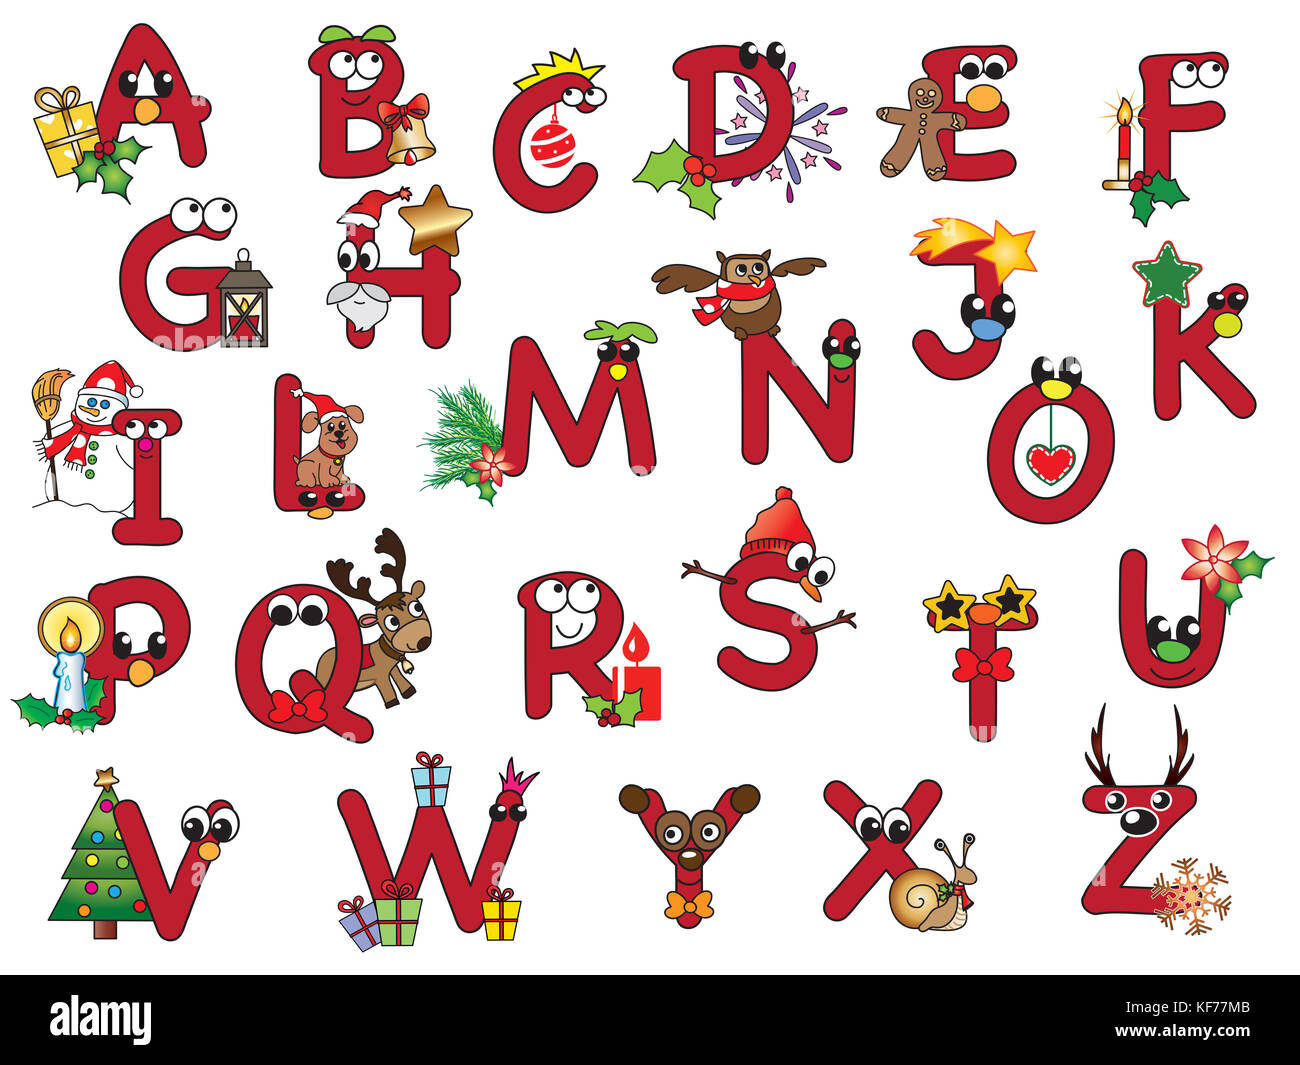 red-christmas-alphabet-with-happy-letters-stock-photo-164272875-alamy